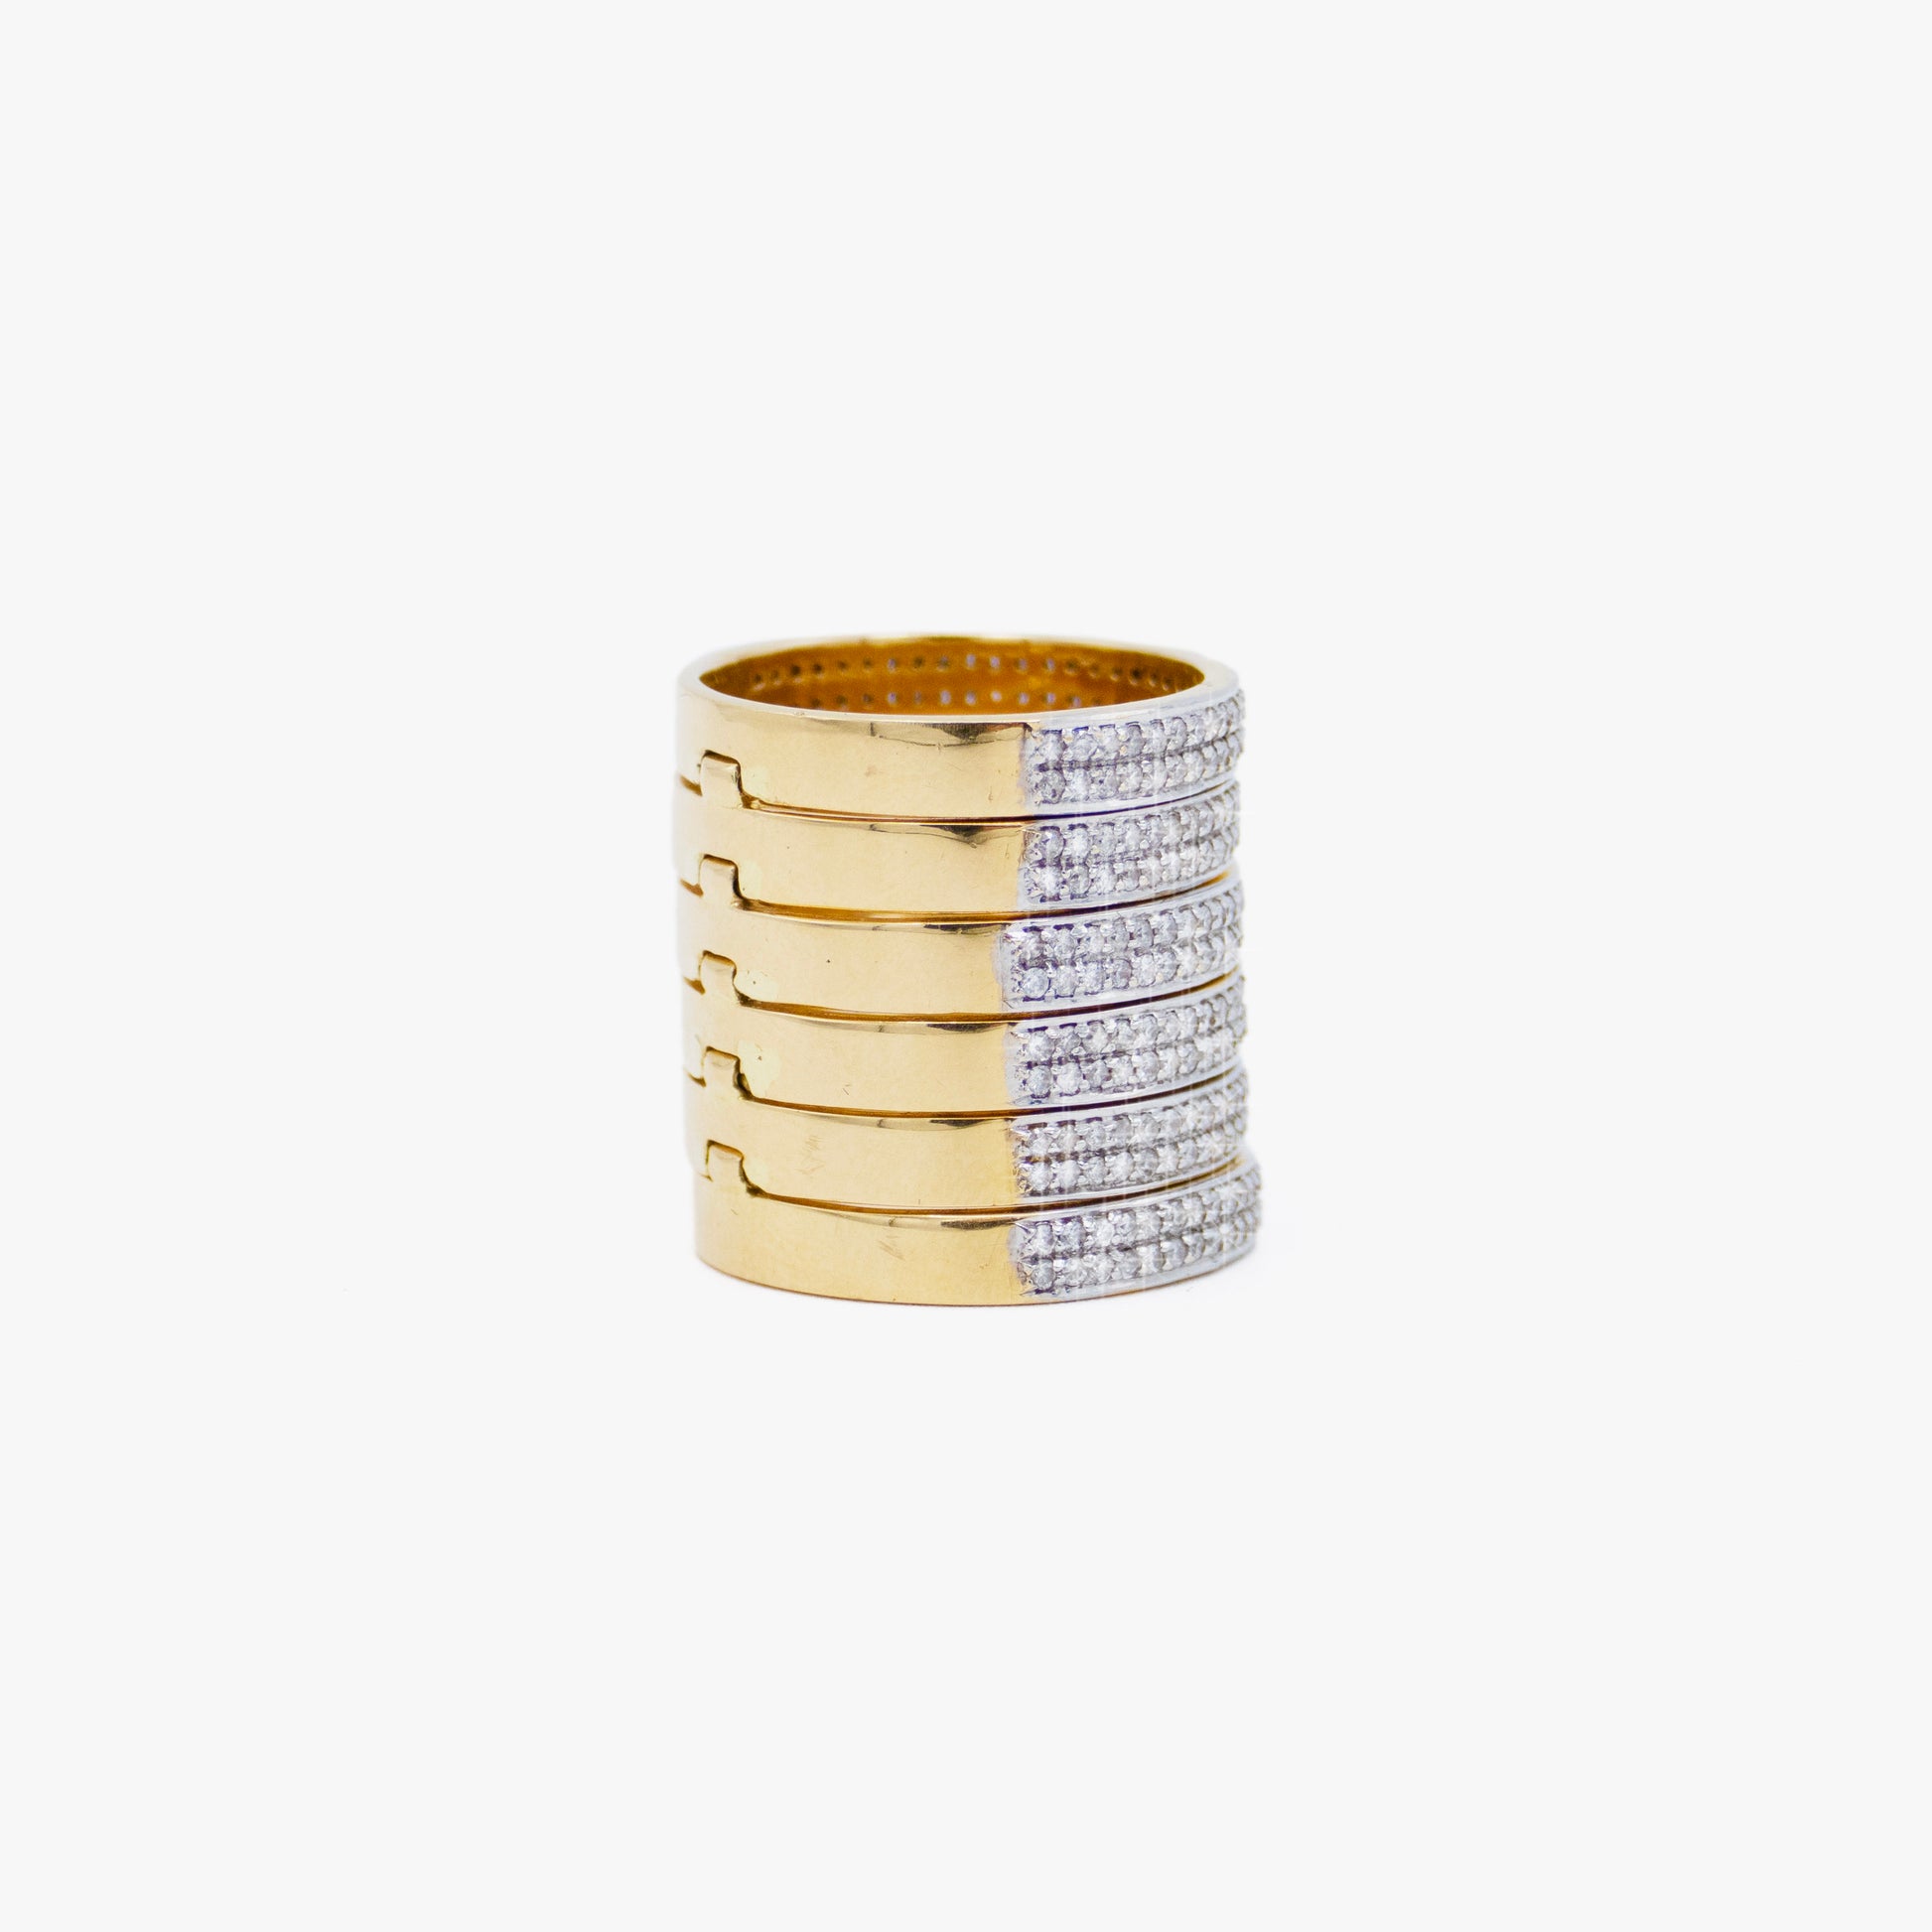 AM Studio 18KT Gold and Diamond Stacked Ring